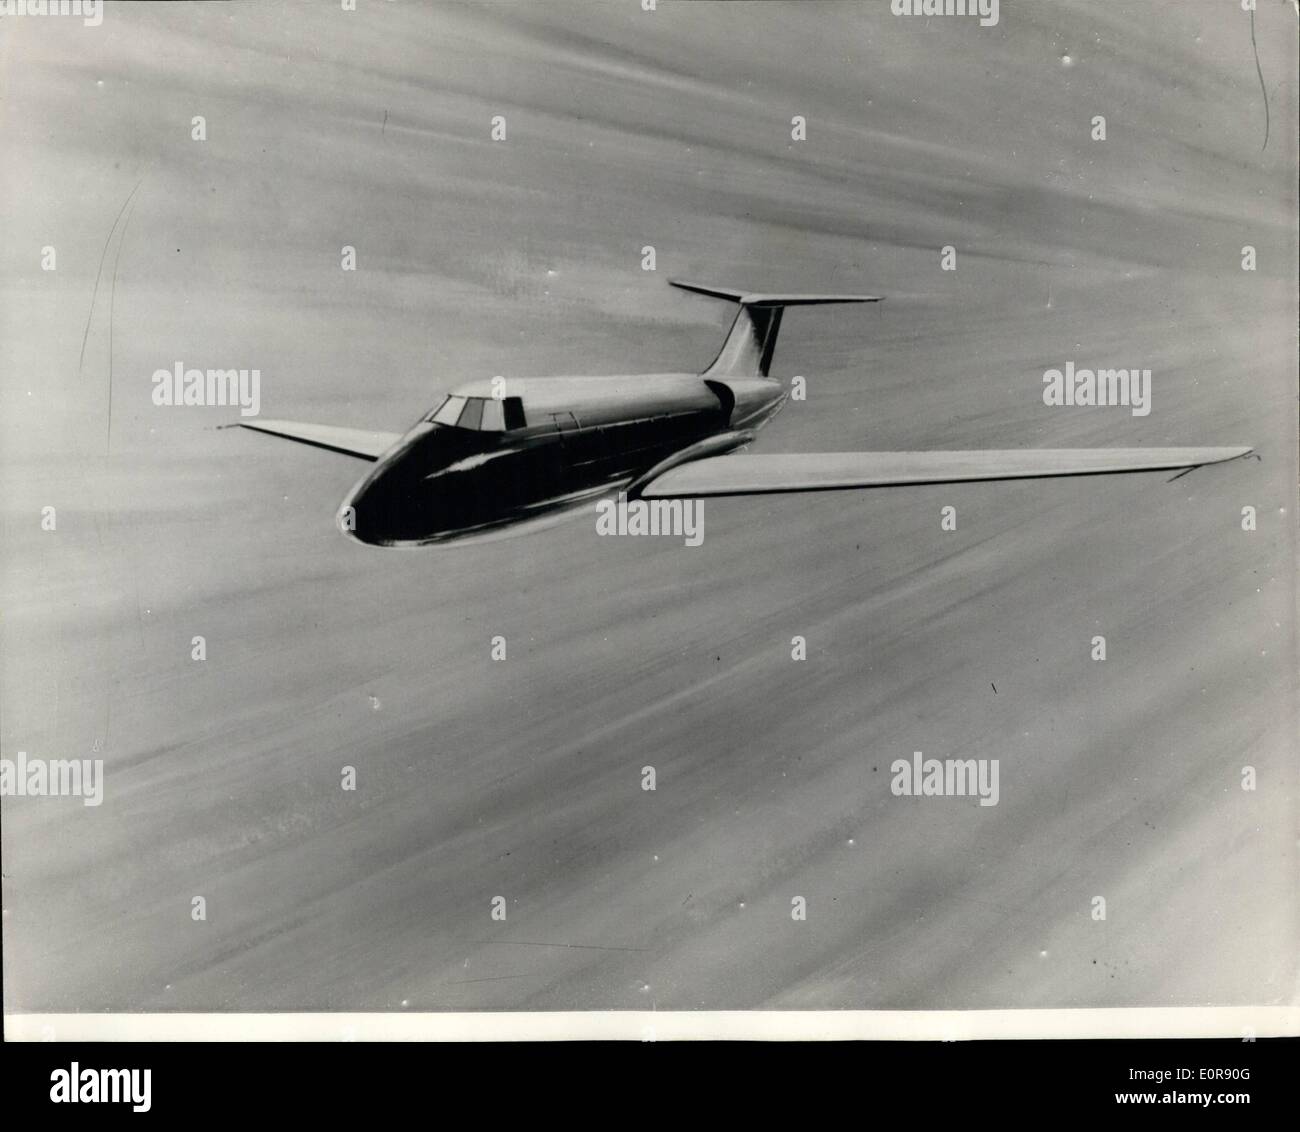 Aug. 08, 1958 - Introducing The Handley Page 113. Long Range Aircraft For Business Executives: The Handley Page Company of Cricklewood has announced the introduction of H.M. 113 - Britain's first high speed long distance small jet liner for executives and V.I. Pep. The Company believes that the machine has great possibilities for use by businessmen in travelling around the world's trade centers. It is designed to carry 12 passengers from London to New York in 6 3/4 hours. It is designed by 62 year of farmer German pilot Dr Stock Photo